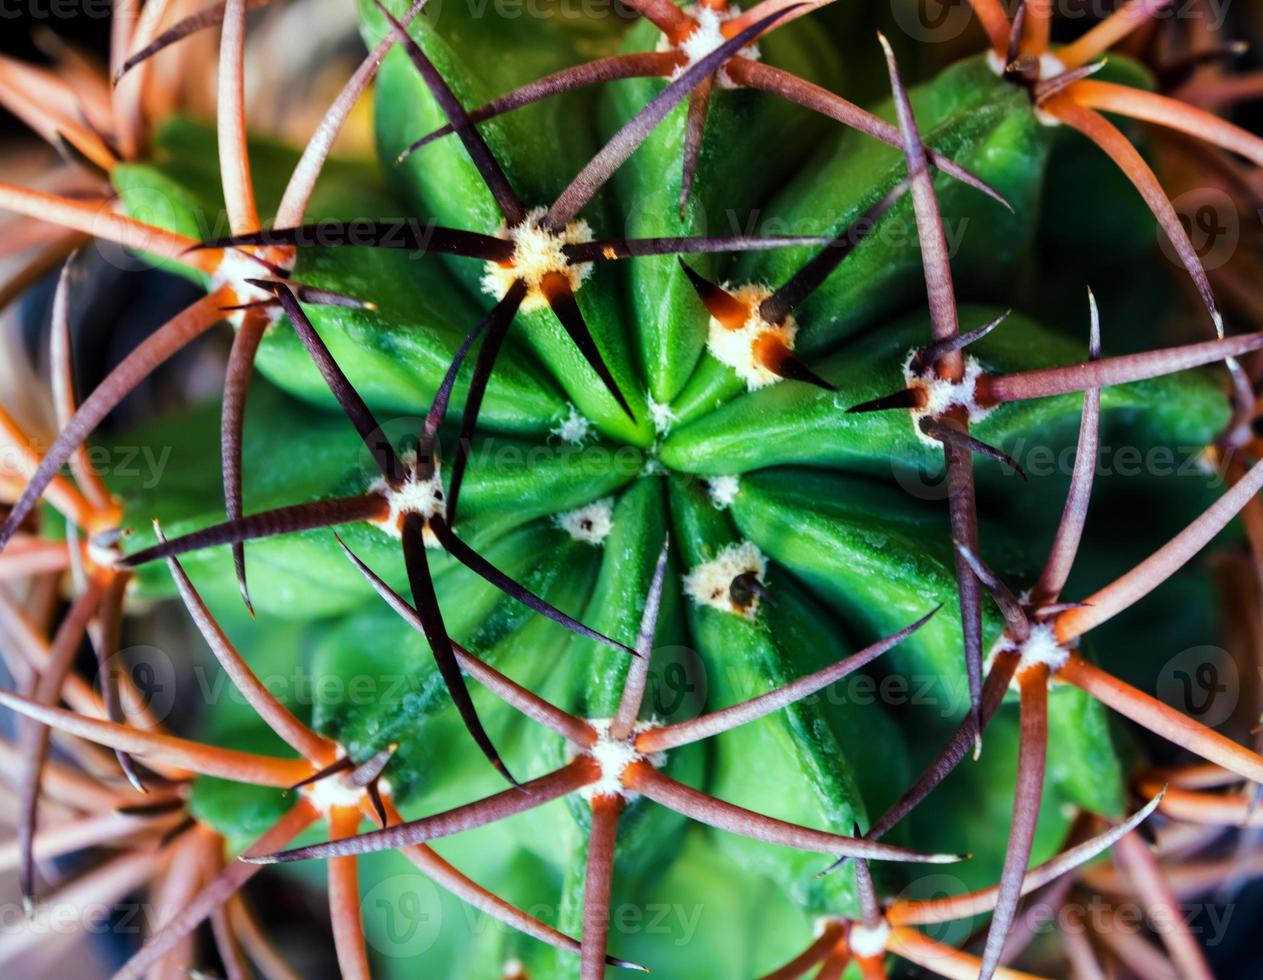 Curved and large thorns of cactus, Succulent plant close up photo